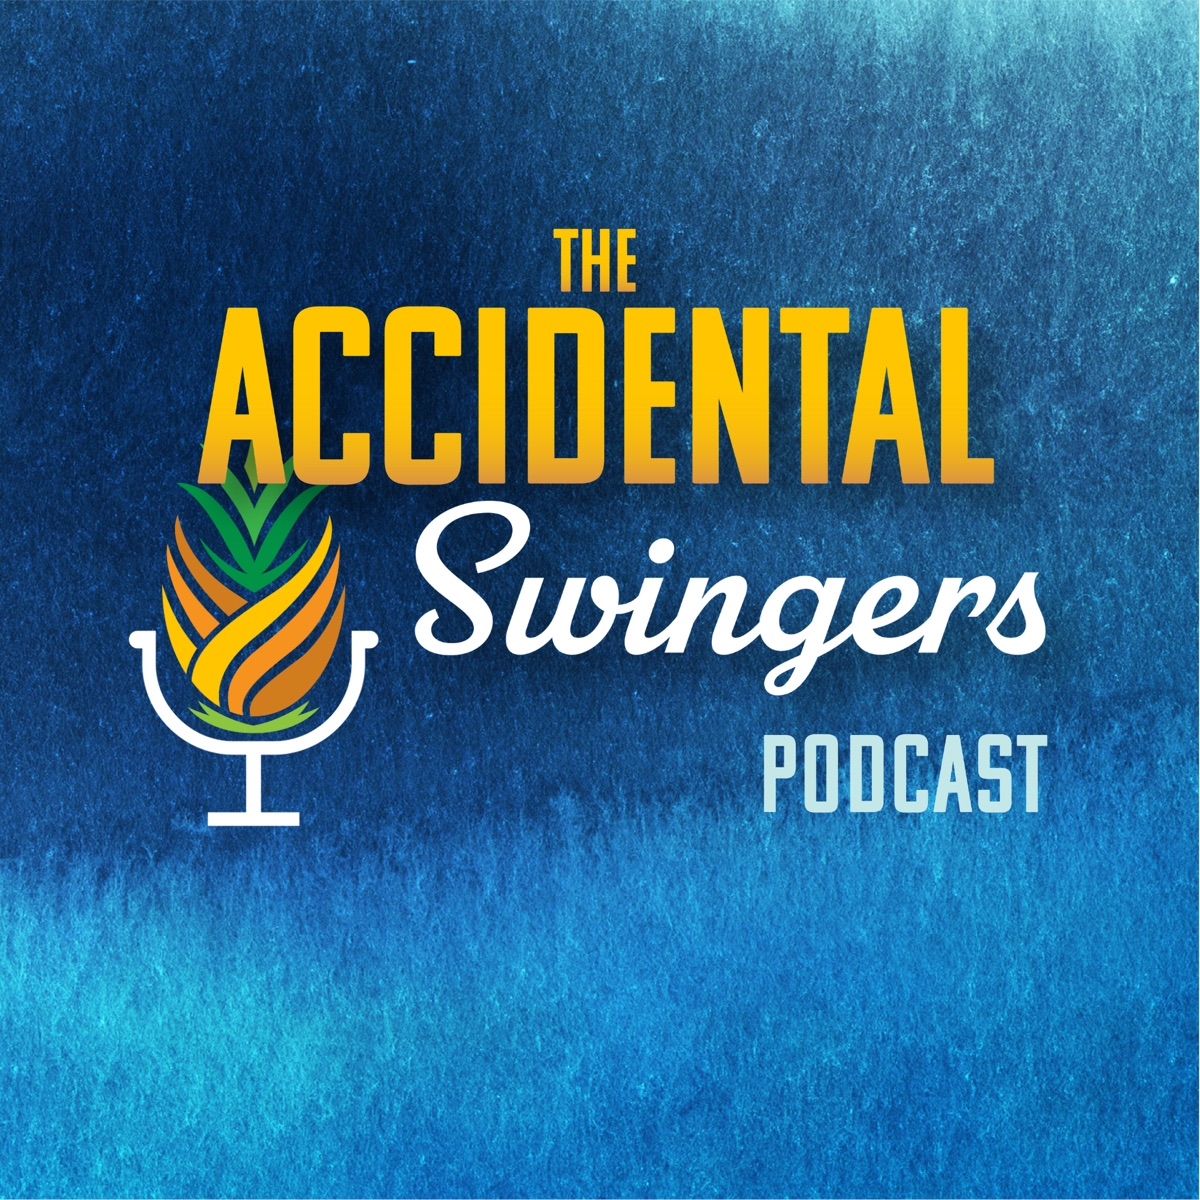 Accidental Swingers – Podcast pic